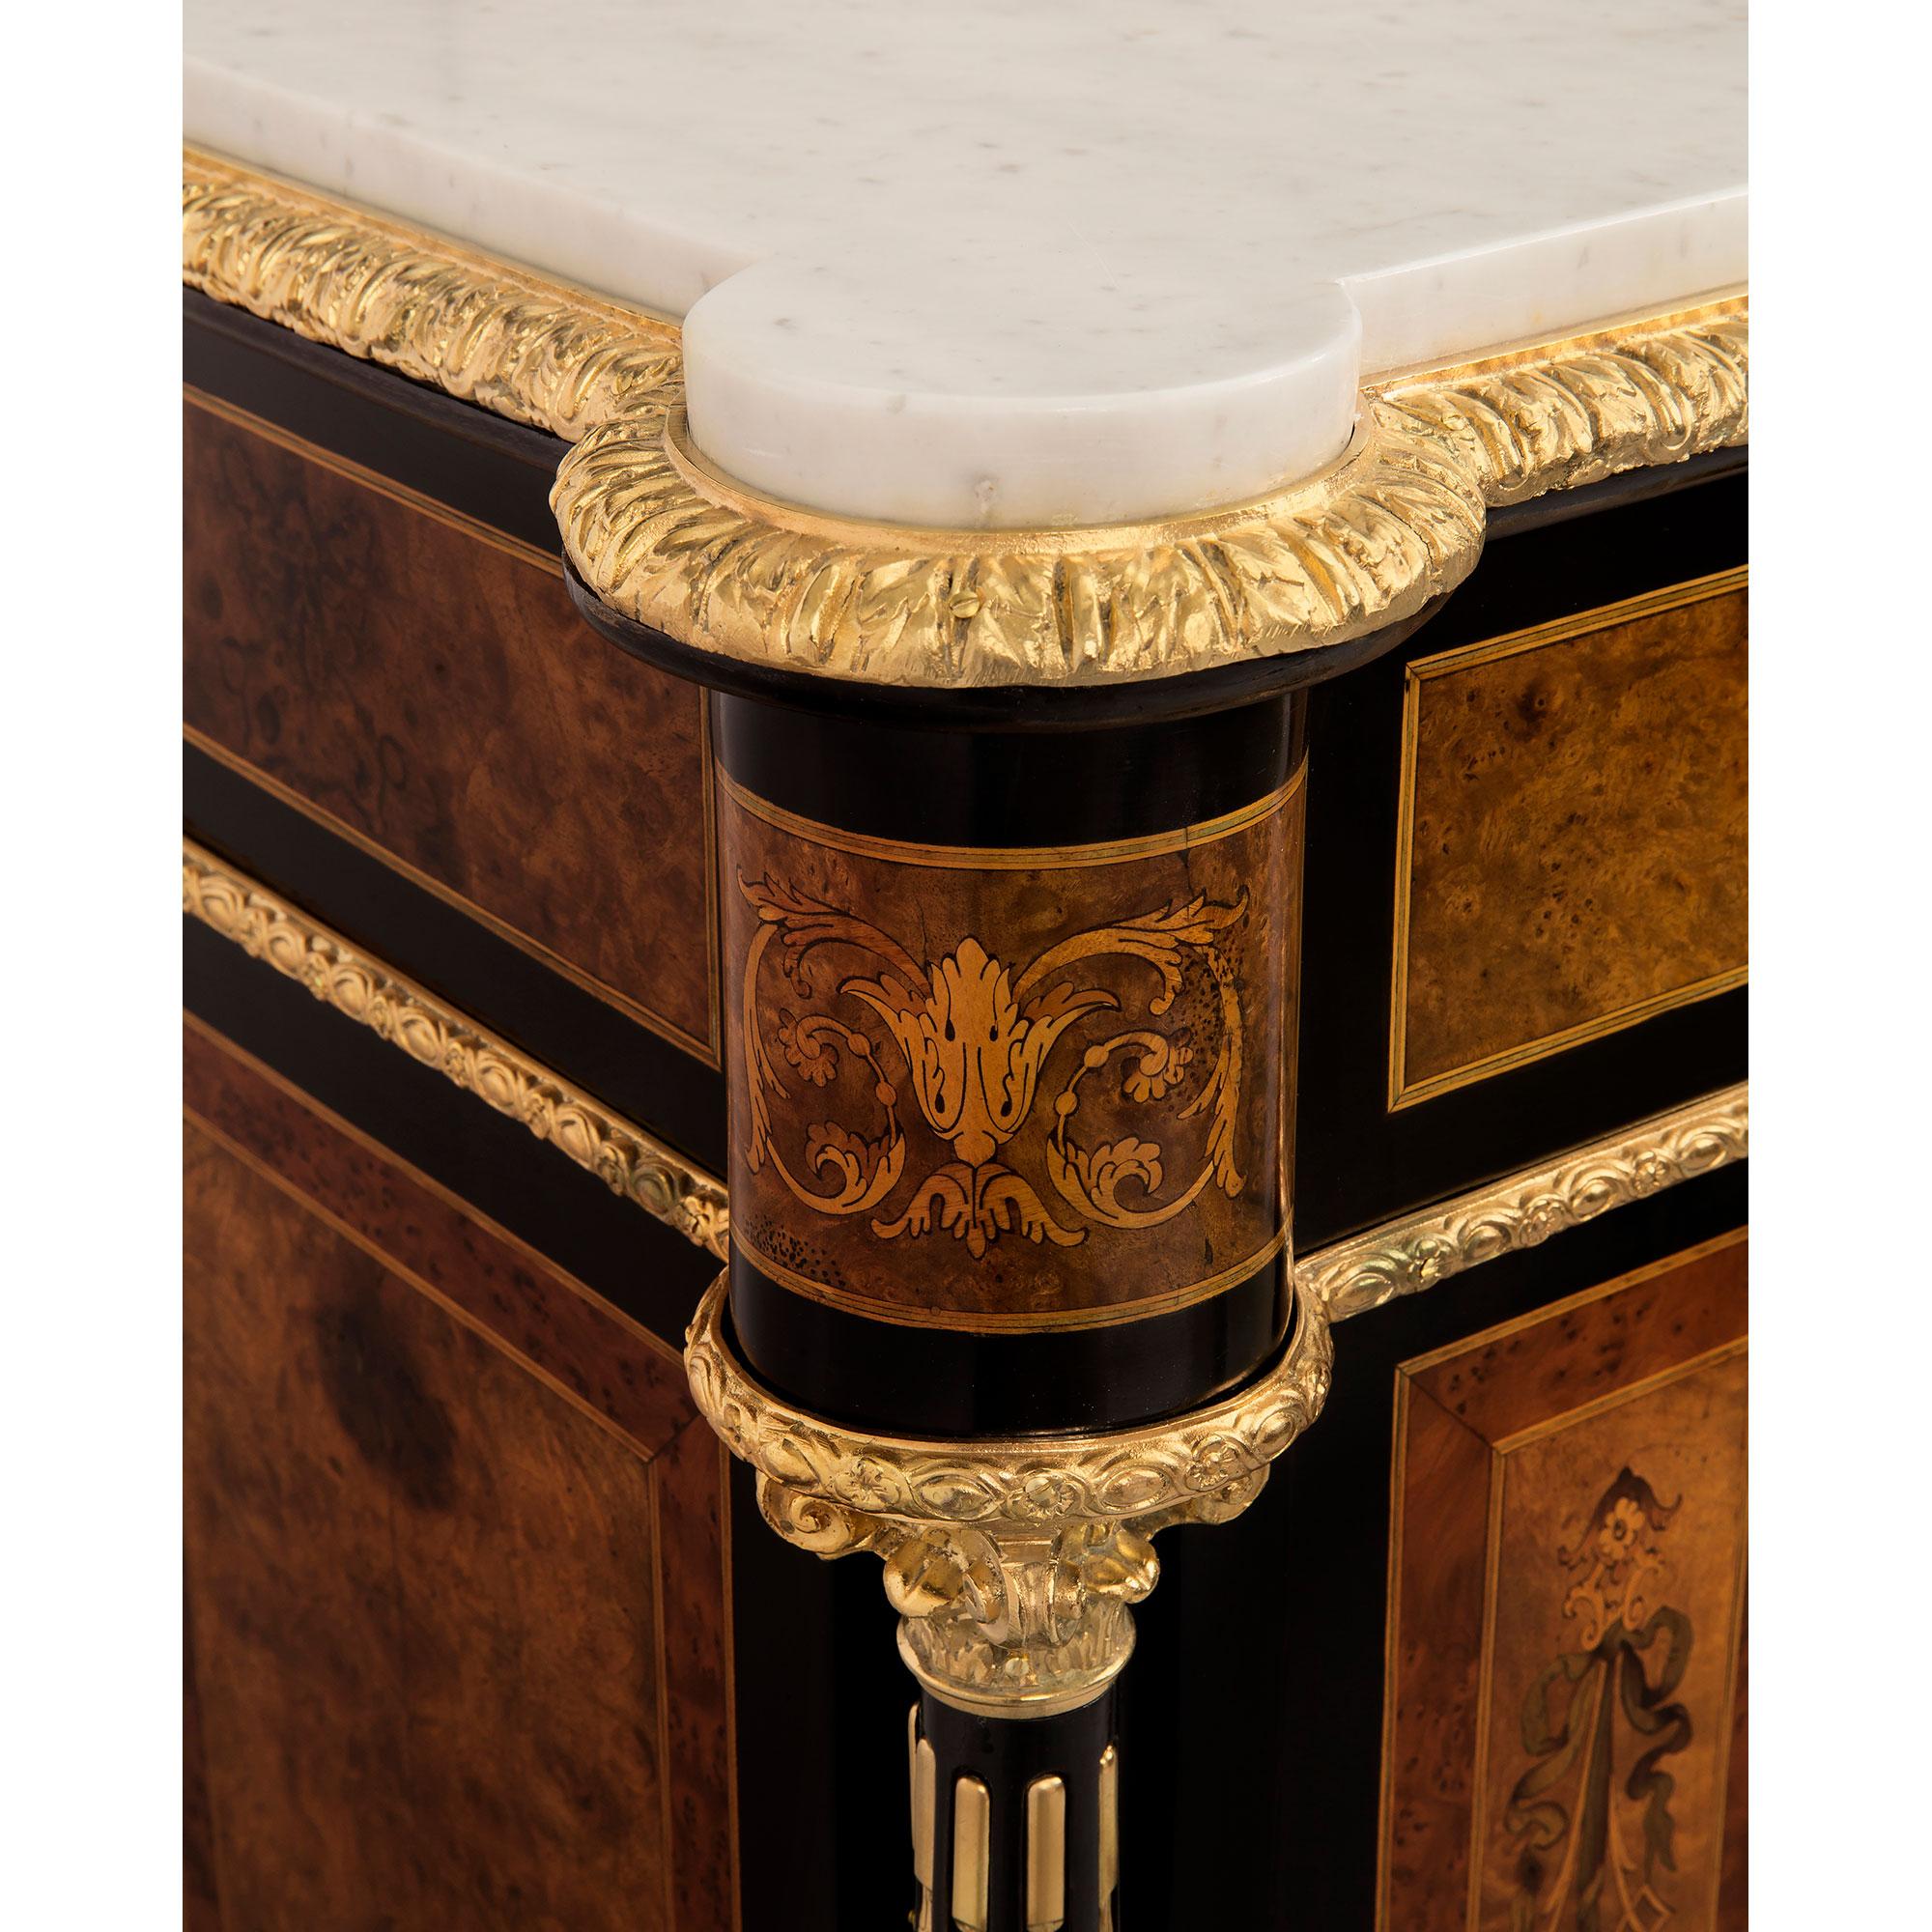 French 19th Century Napoleon III Period Exotic Wood, Ormolu and Marble Cabinet For Sale 4